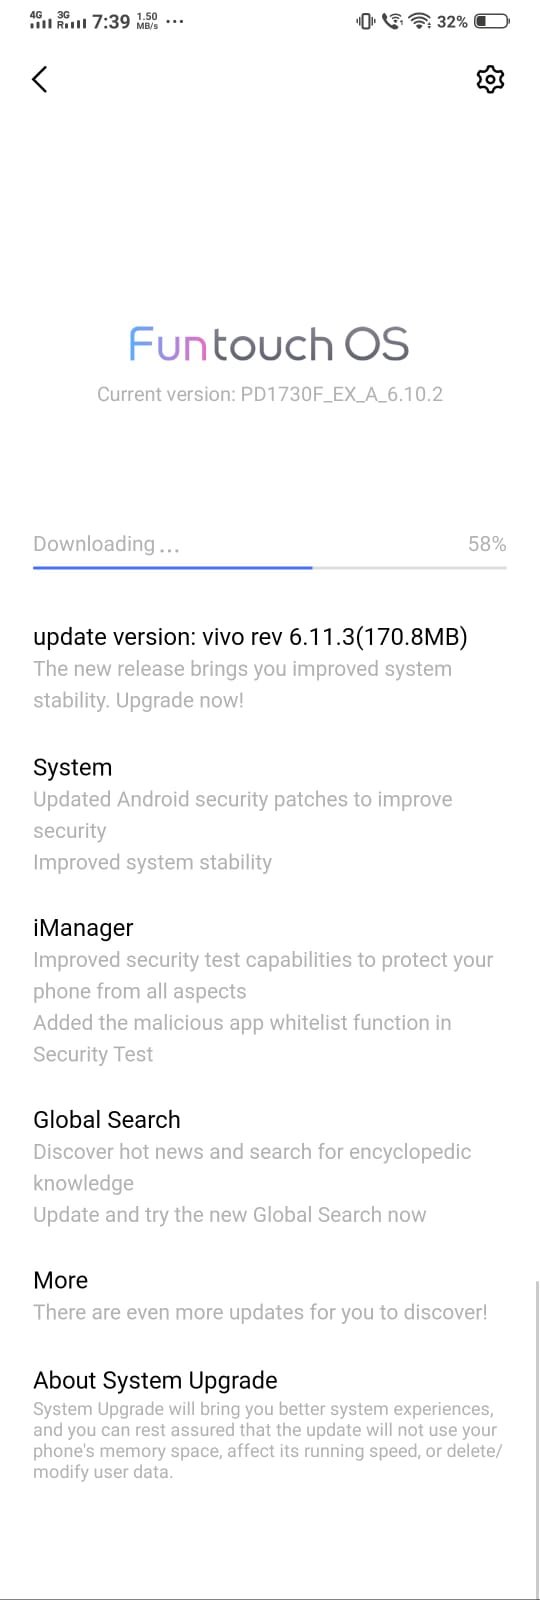 Vivo V9 receives new Security update